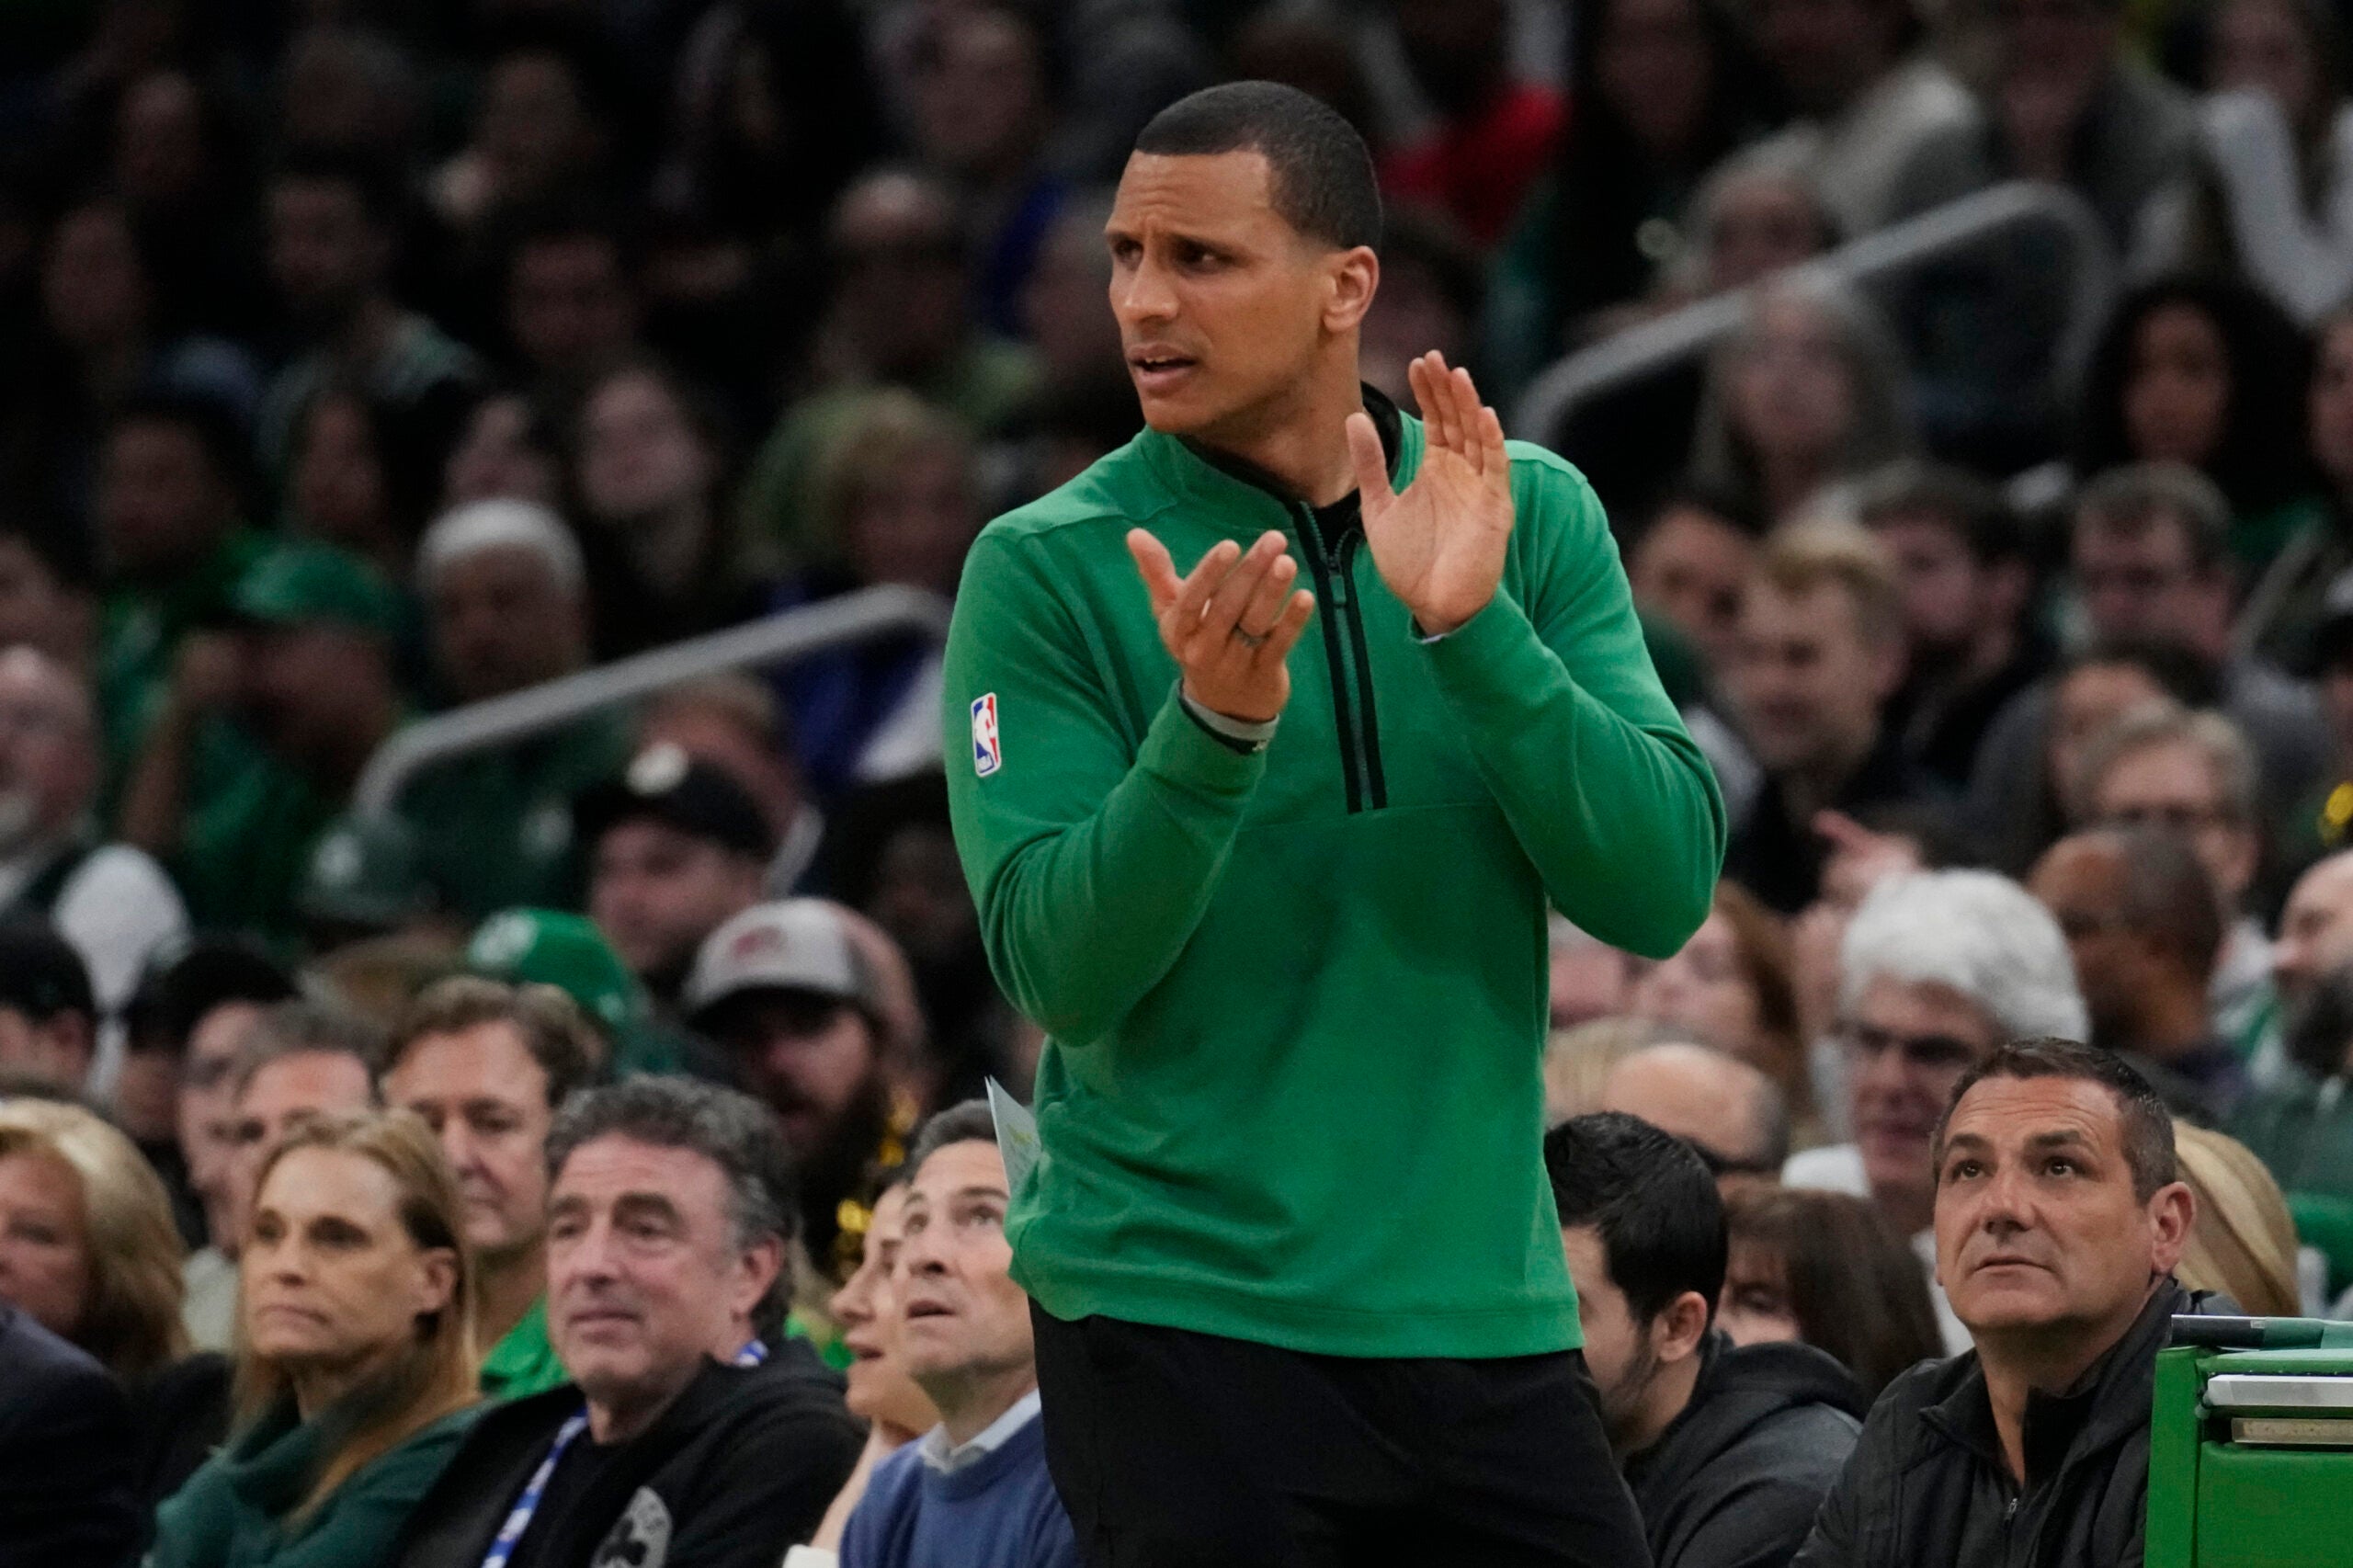 Boston Celtics head coach Joe Mazzulla during Game 2 in the NBA basketball Eastern Conference semifinals playoff series, Wednesday, May 3, 2023, in Boston.